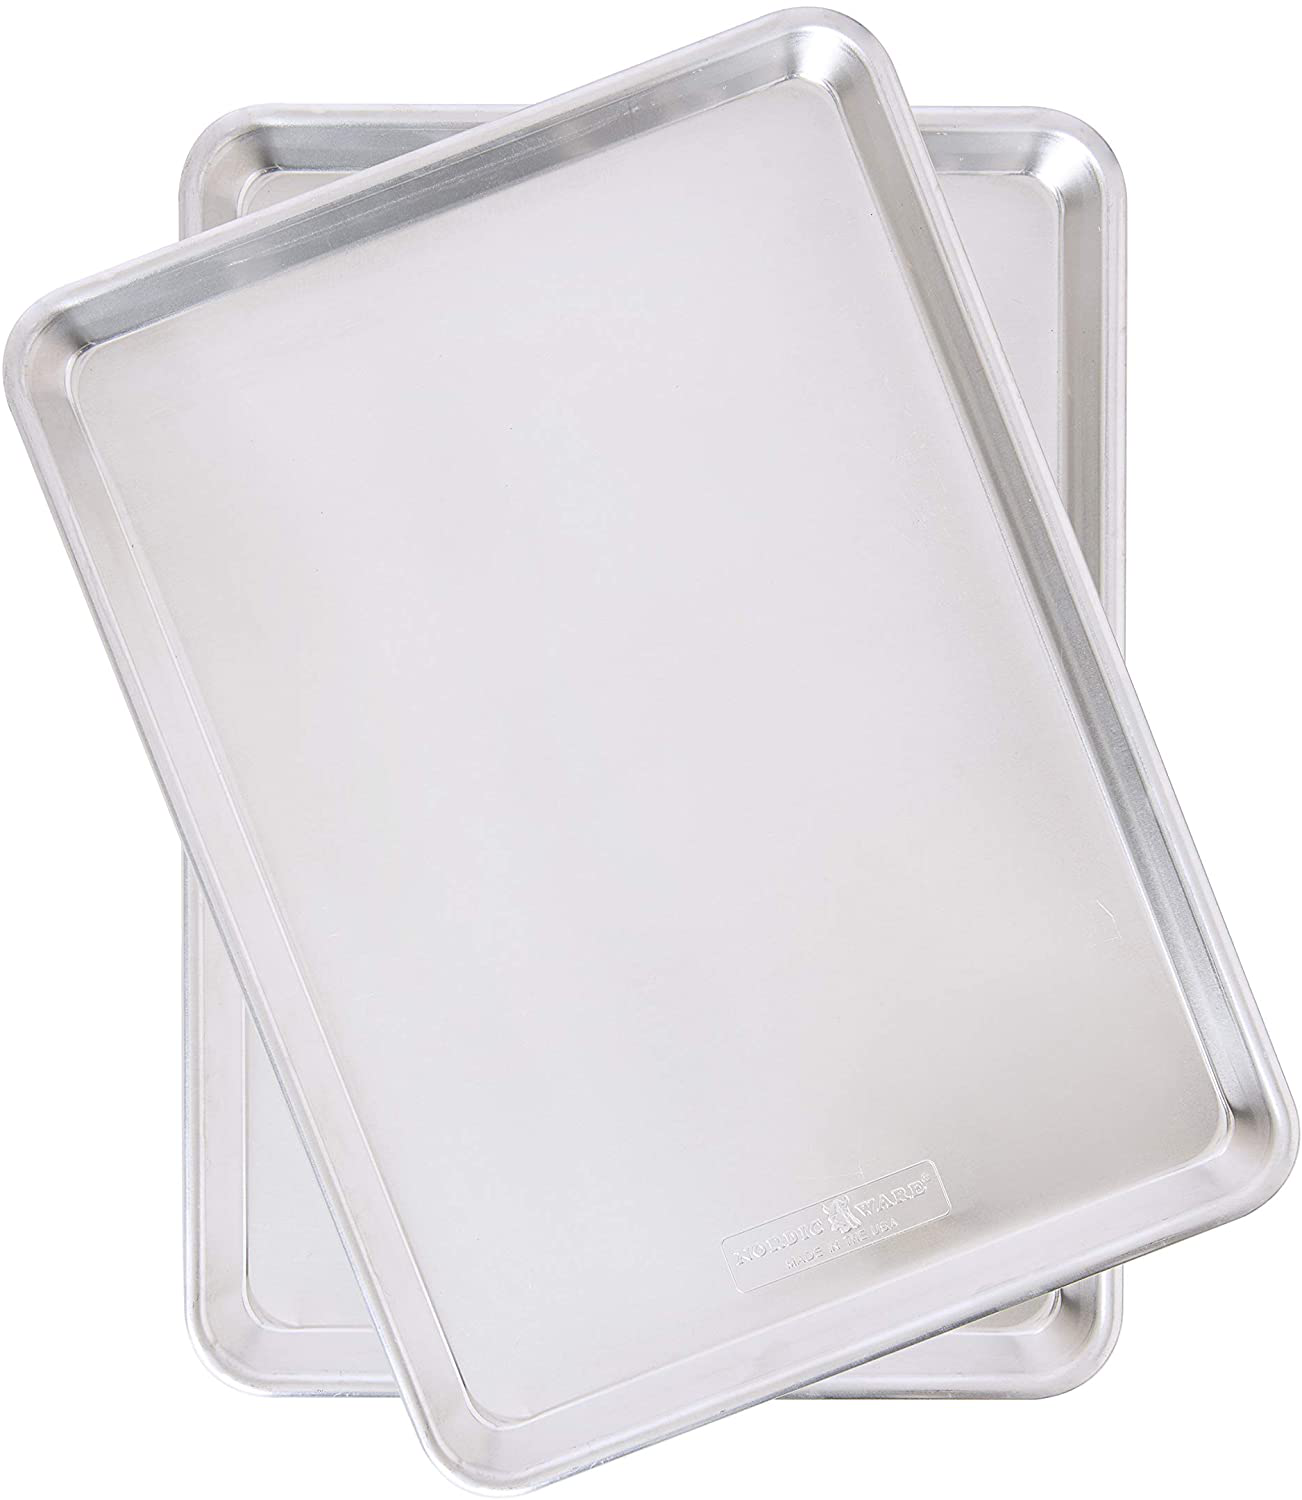 Photo 1 of ***1 ONLY****
Nordic Ware Natural Aluminum Commercial Baker's Half Sheet, Silver